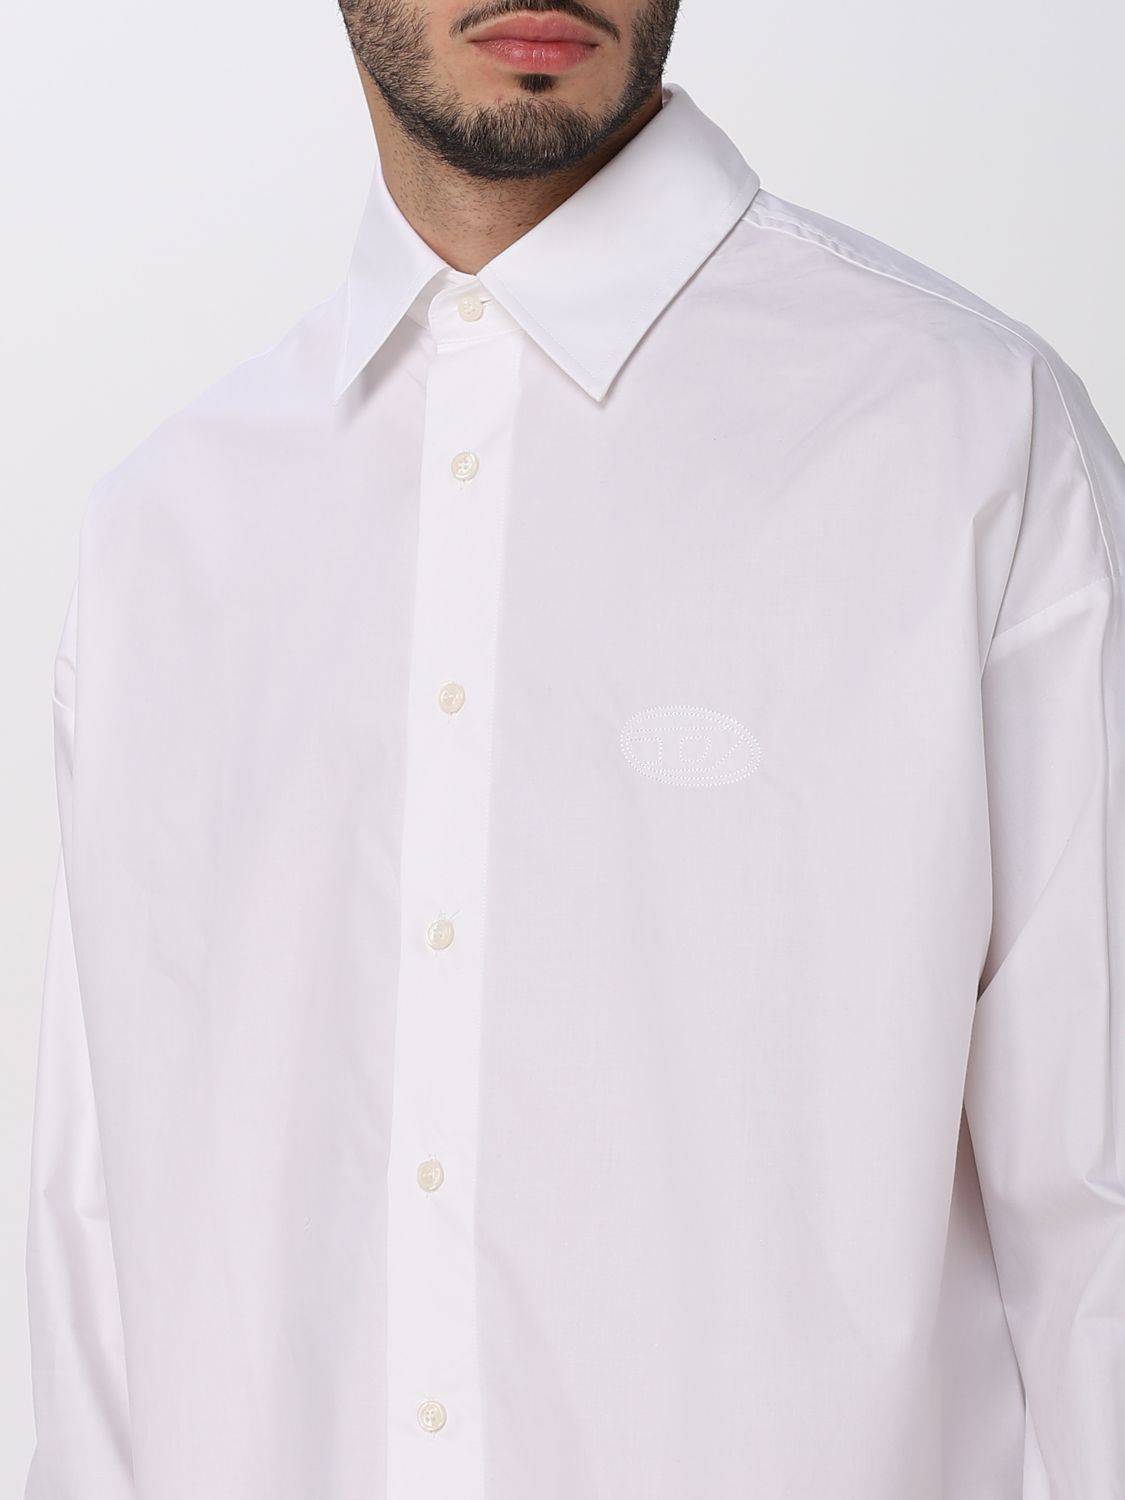 DIESEL: shirt for man - White | Diesel shirt A089370PCAL online on ...